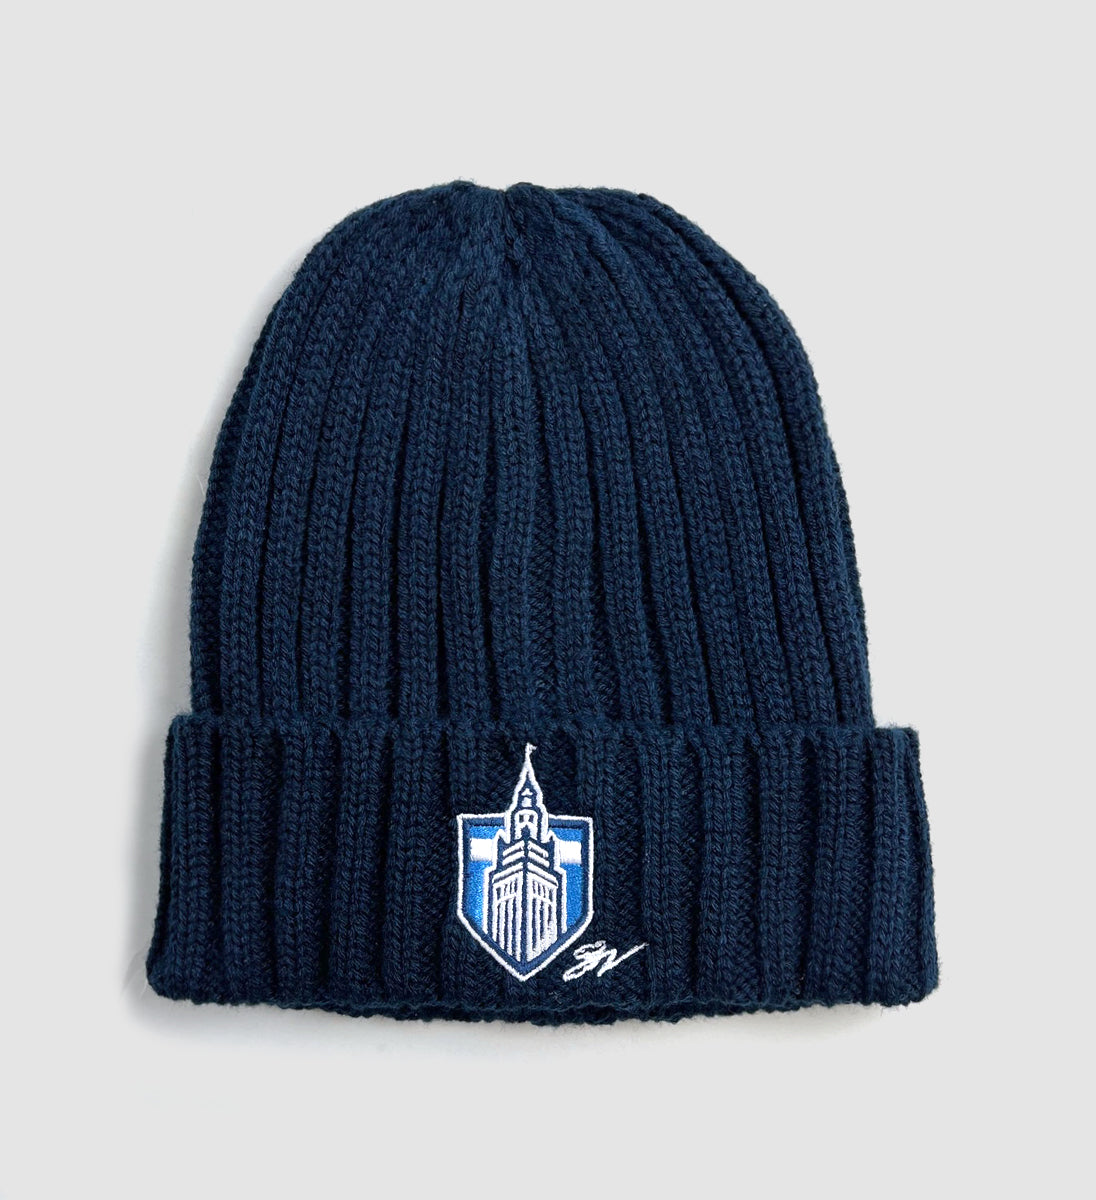 Navy Cleveland Crest Cable Winter Hat